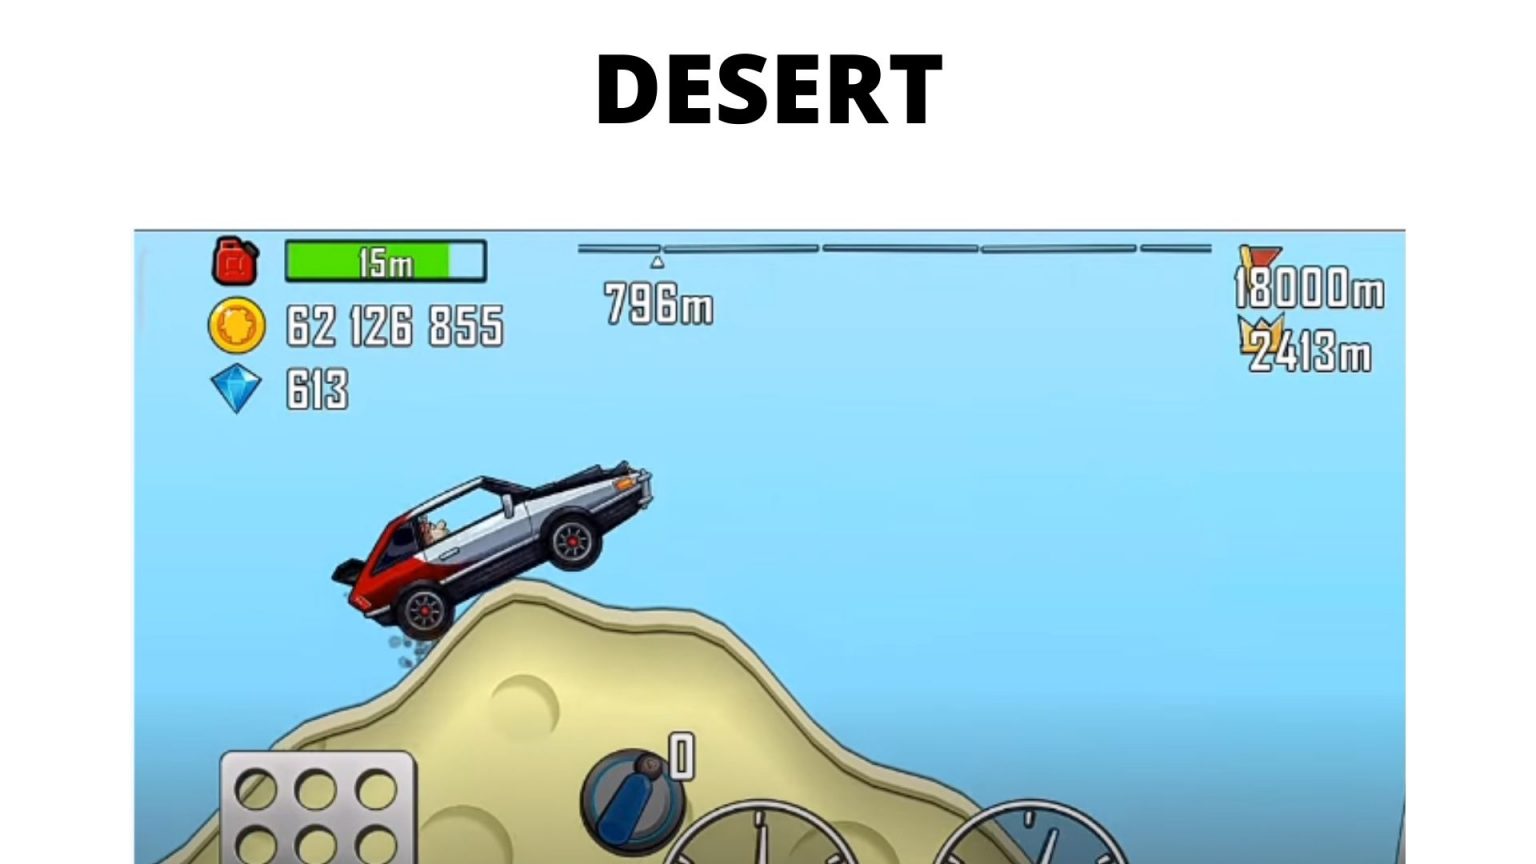 hill climb racing best vehicle mobile